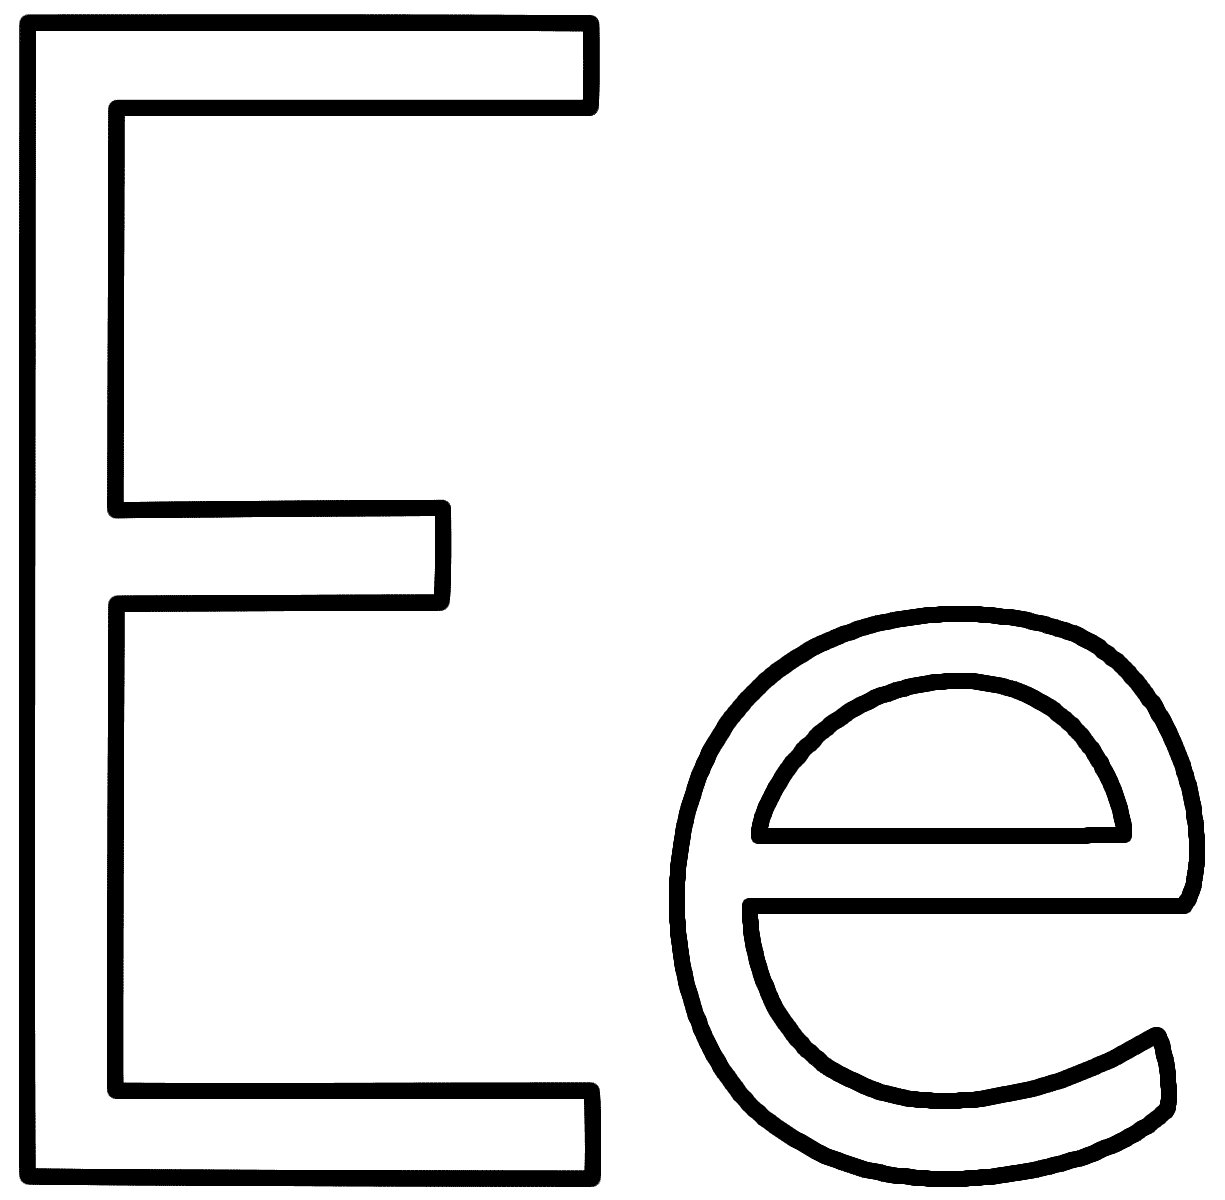 Allergic To The Letter ‘E’ Challenge